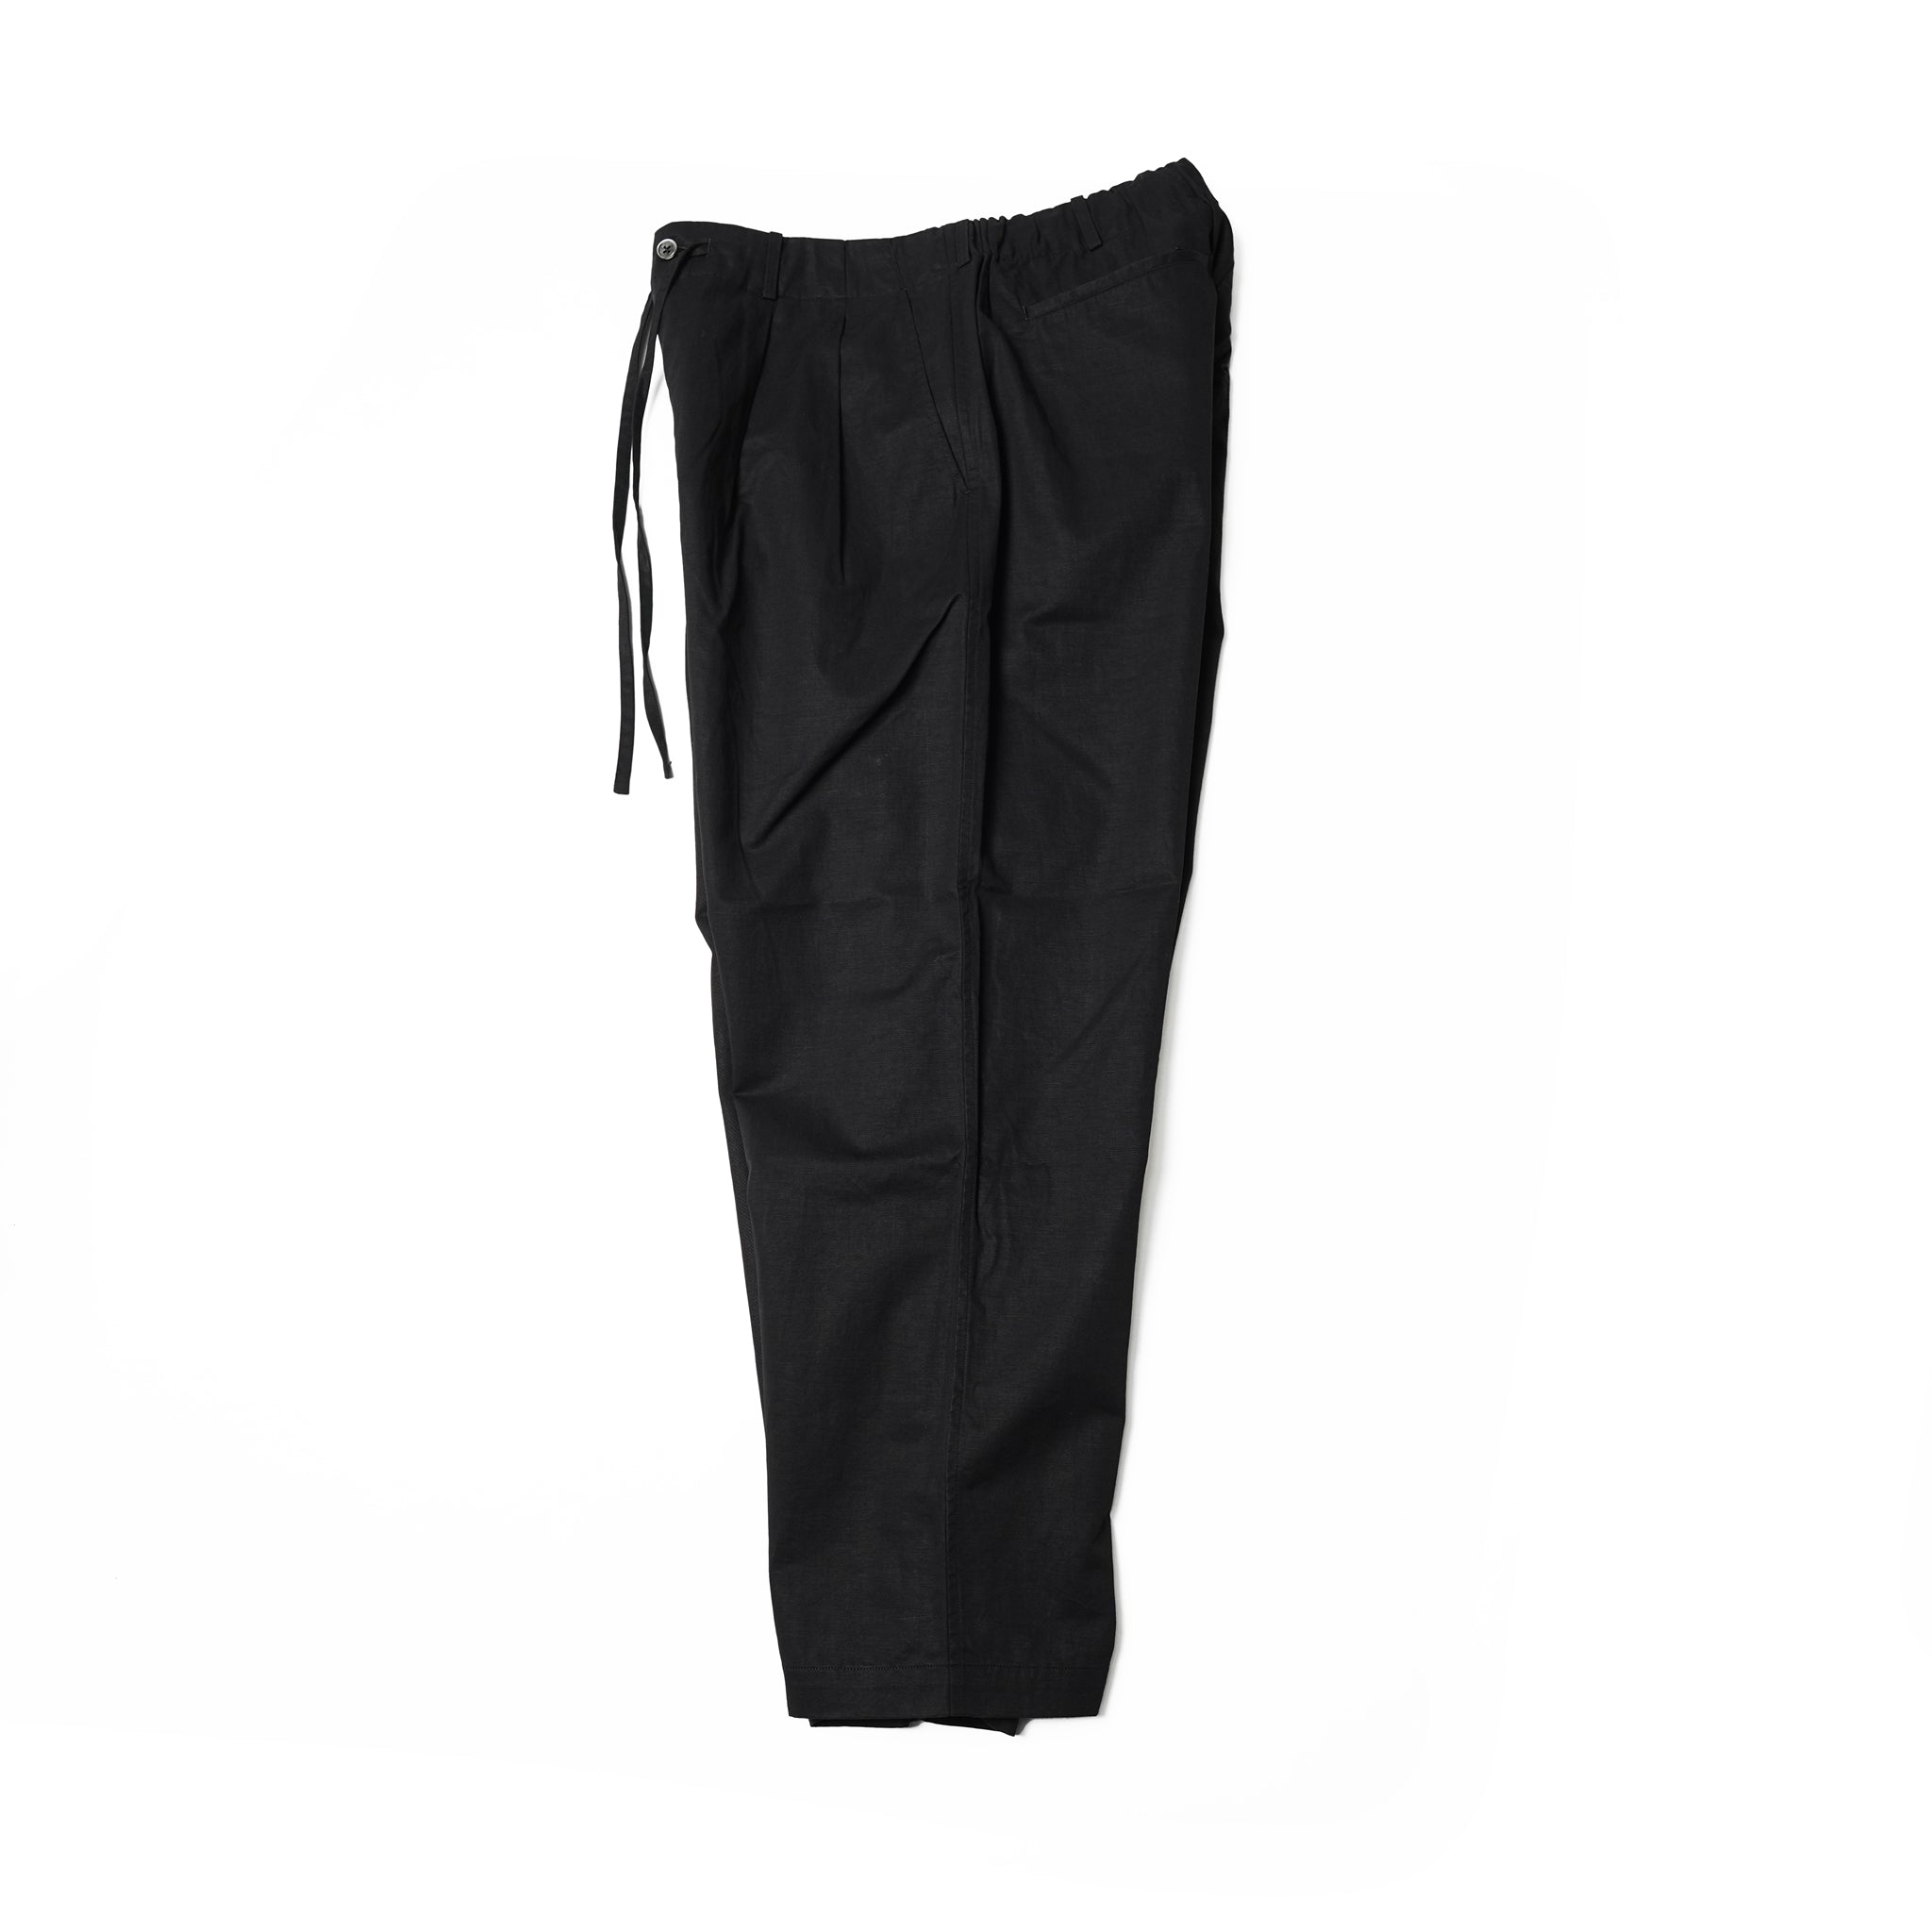 No:BE-03 | Name:BAGS EASY PANTS-COTTON LINEN TWILL | Color:Black【CATTA_カッタ】【入荷予定アイテム・入荷連絡可能】